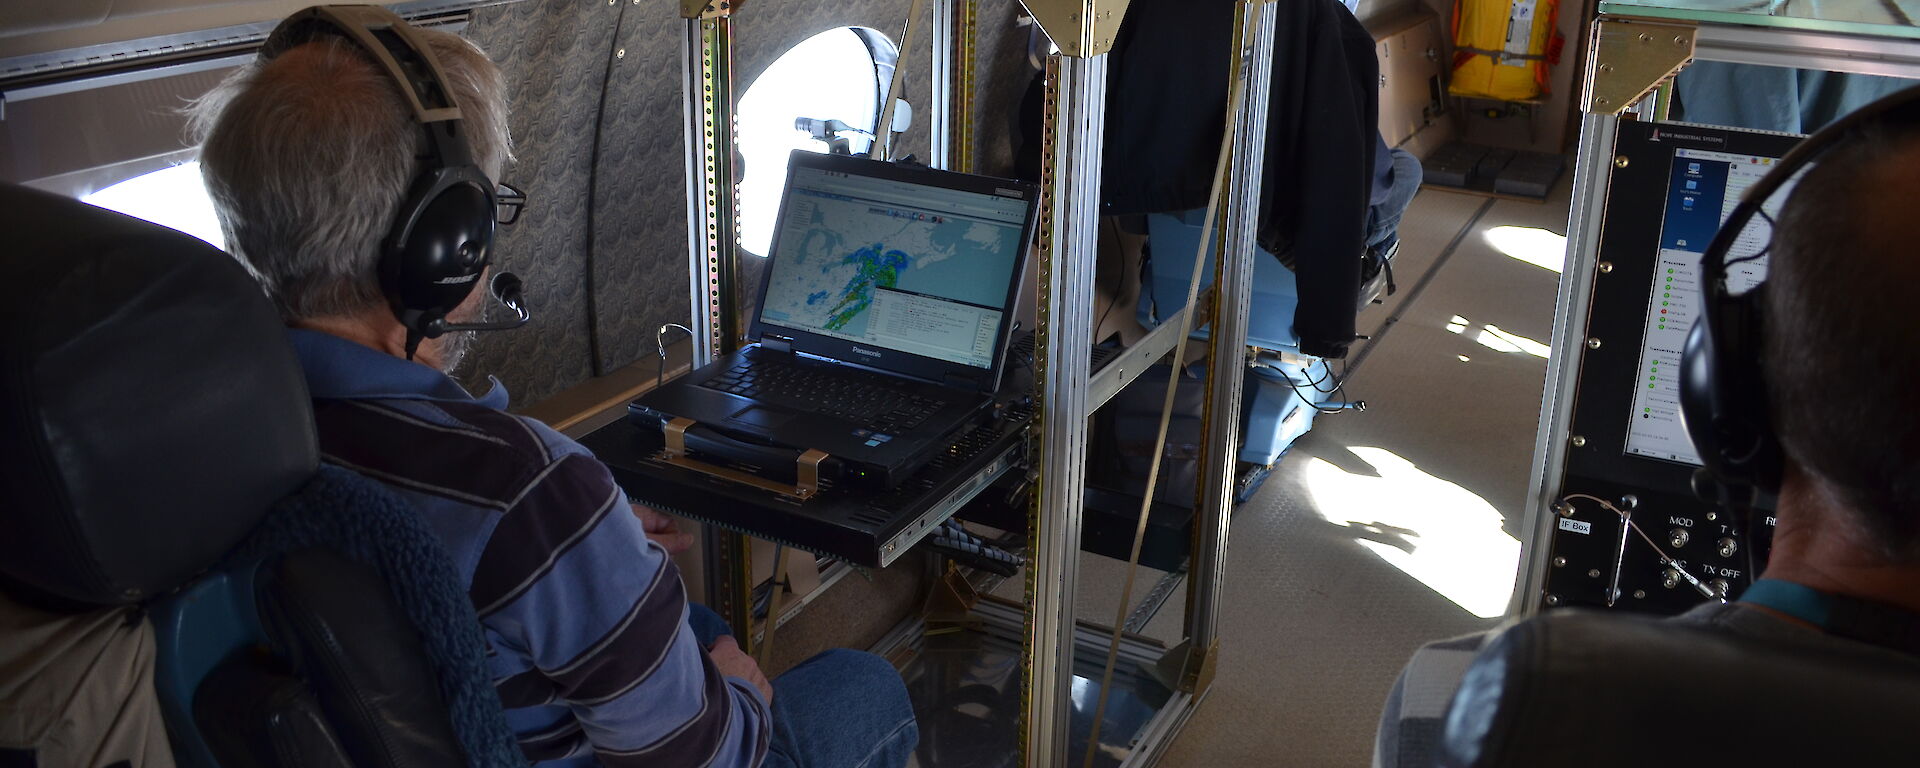 Scientists on board the Gulfstream V aircraft studying real-time data collected by the aircraft’s cloud radar.